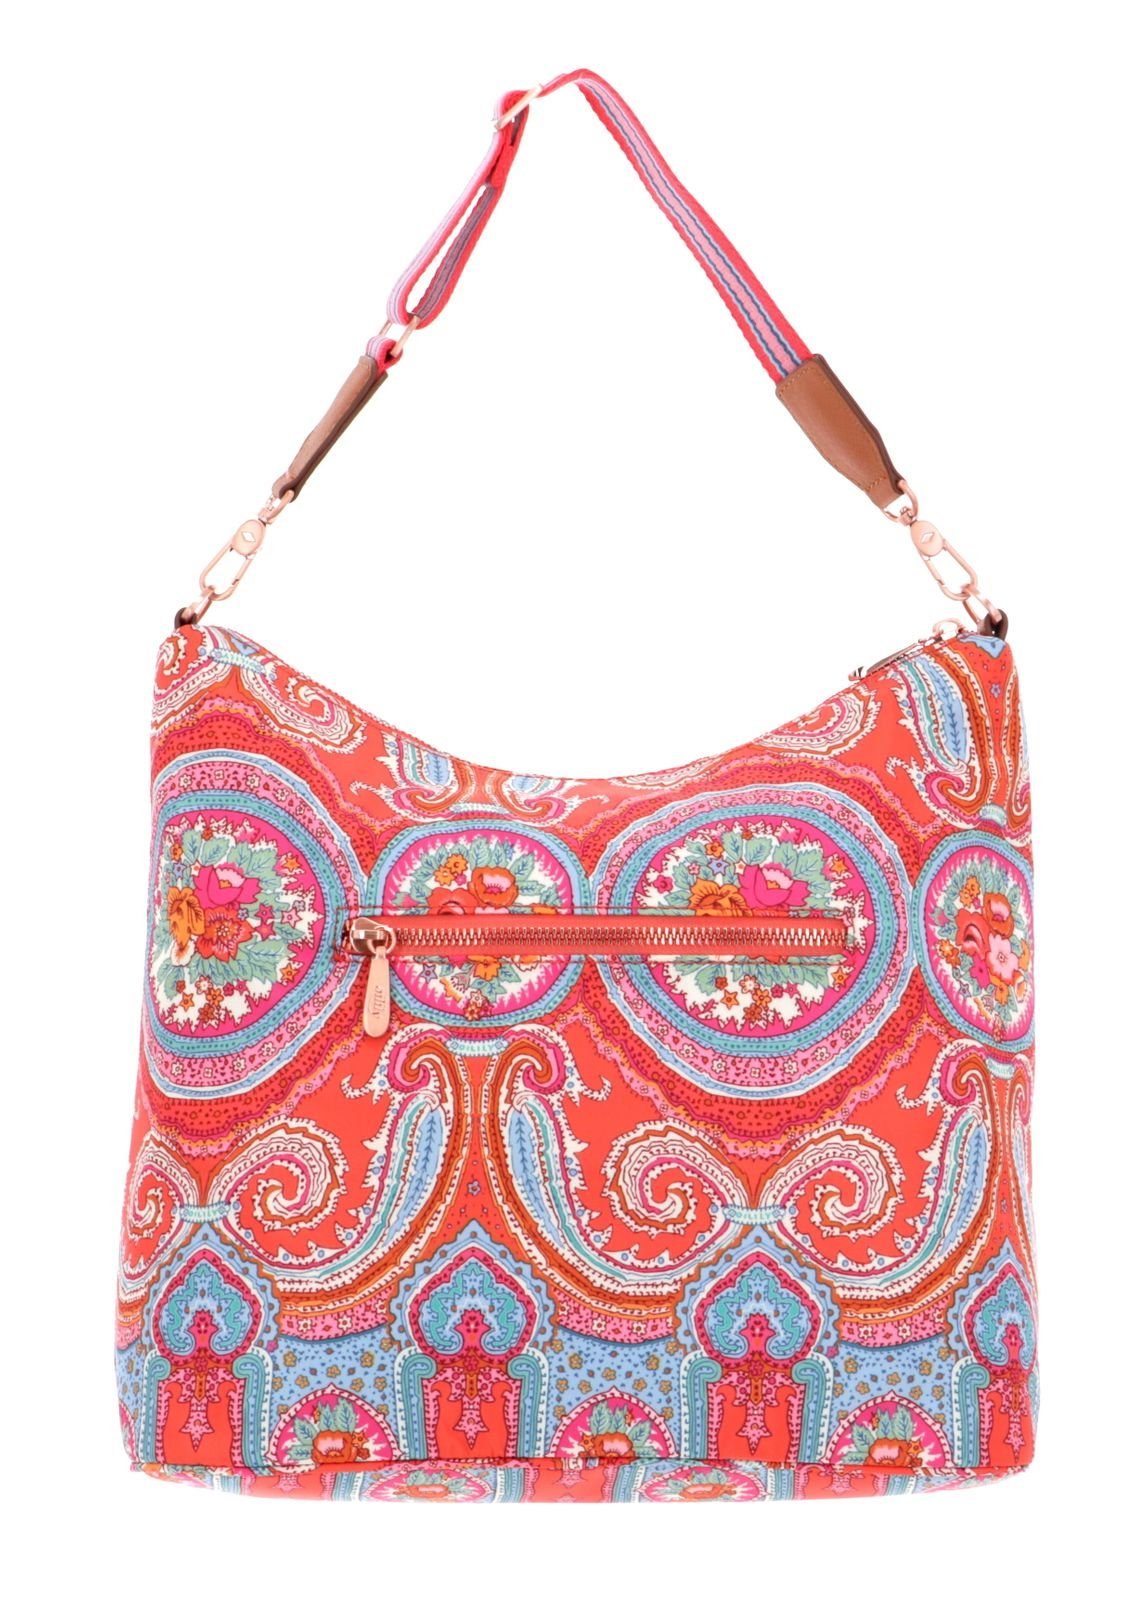 Hot Coral Extra Styles Schultertasche Korea Oilily